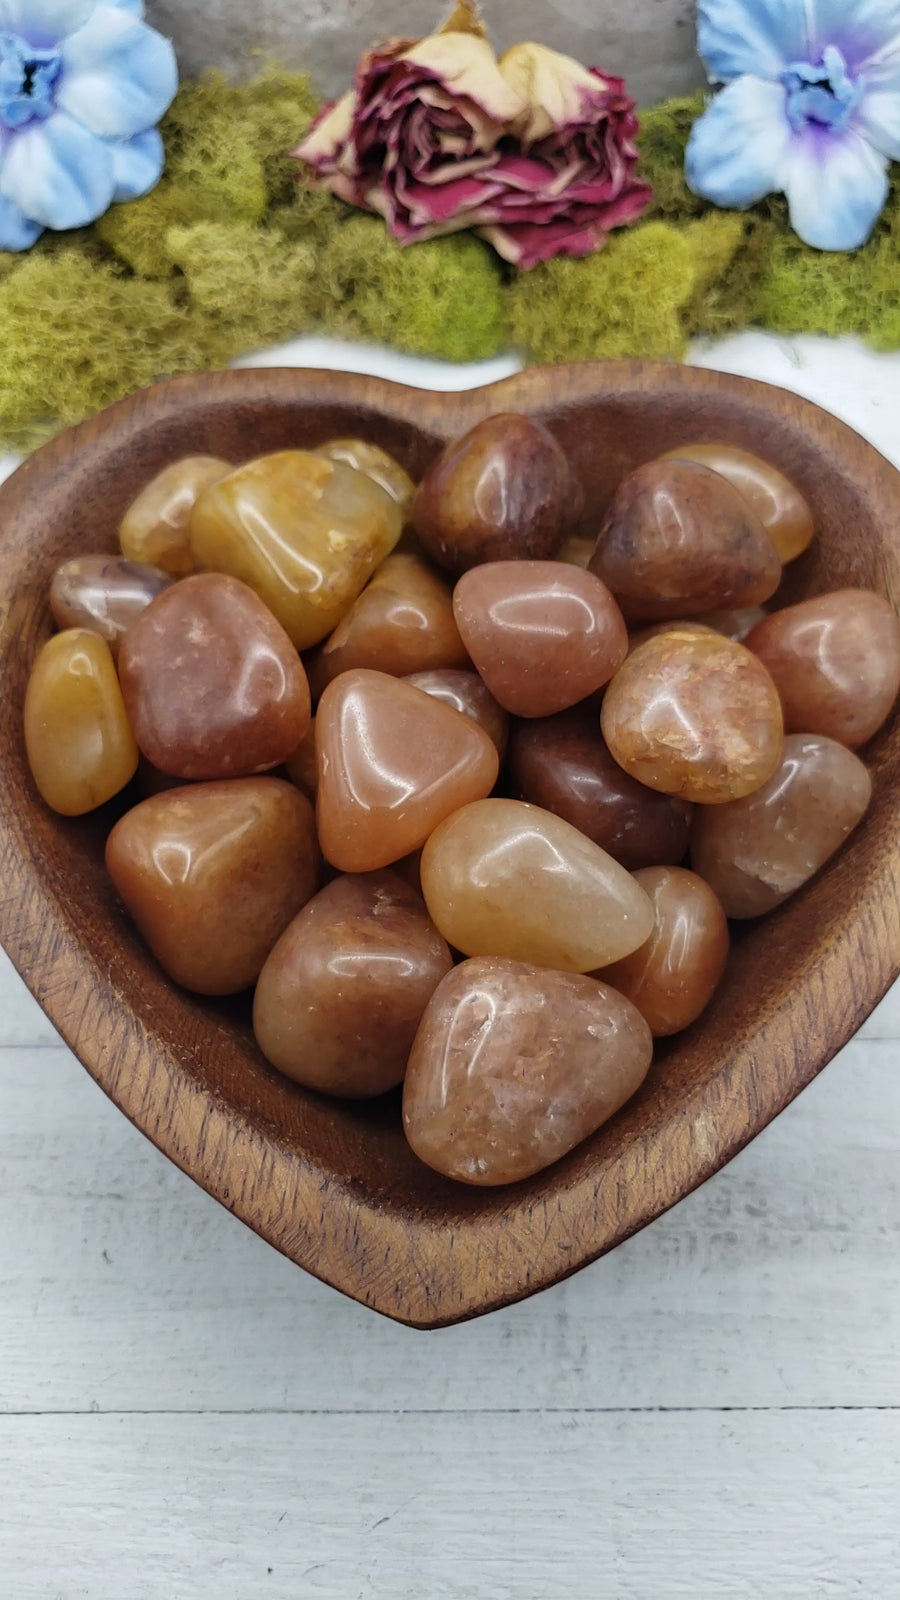 video of gold quartz crystals in heart-shaped bowl